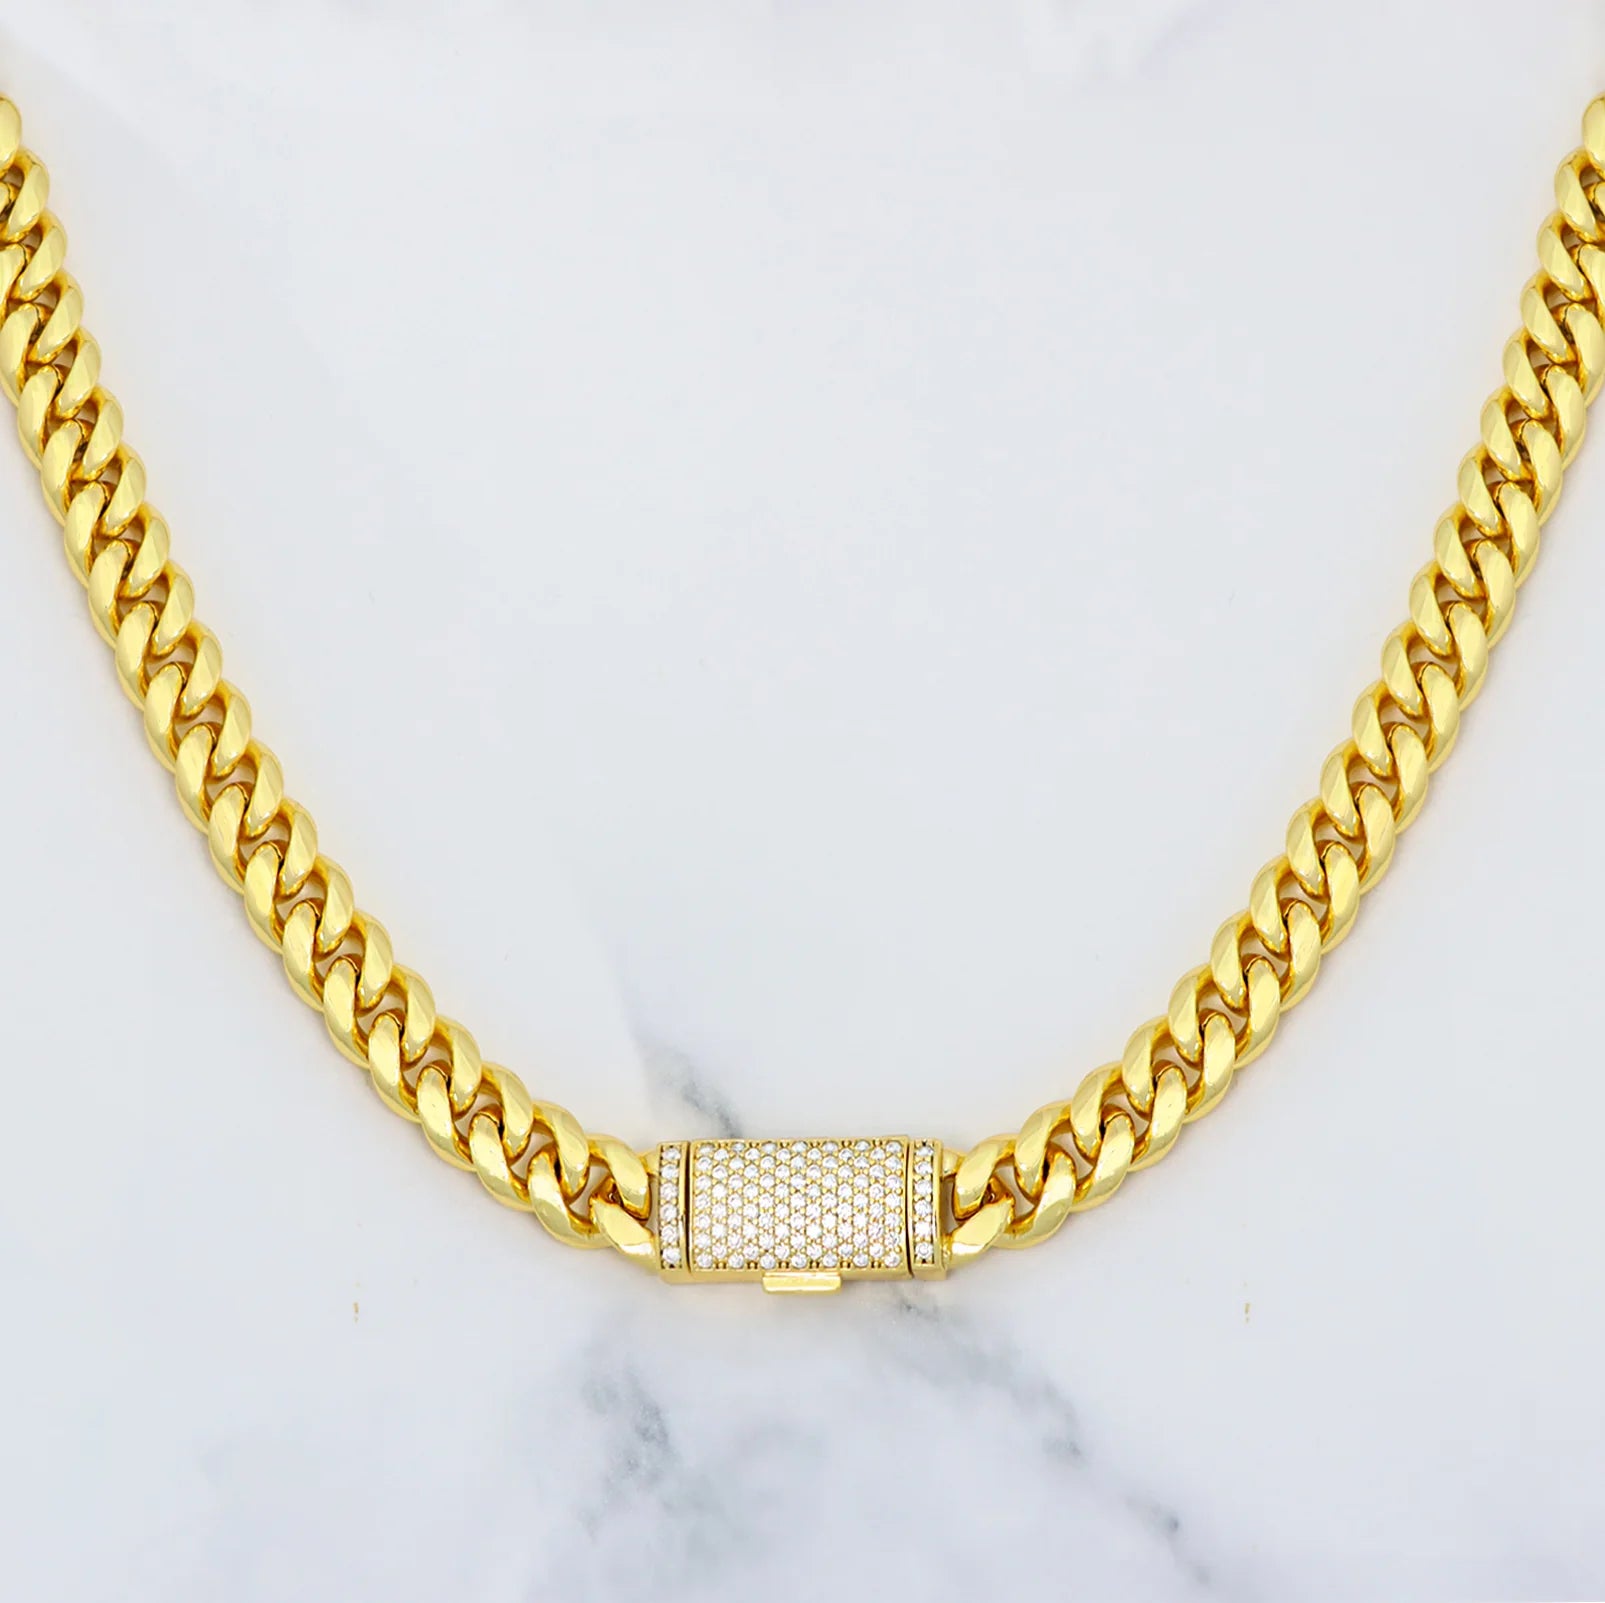 8mm-gold-cuban-link-chain-with-moissanite-clasp